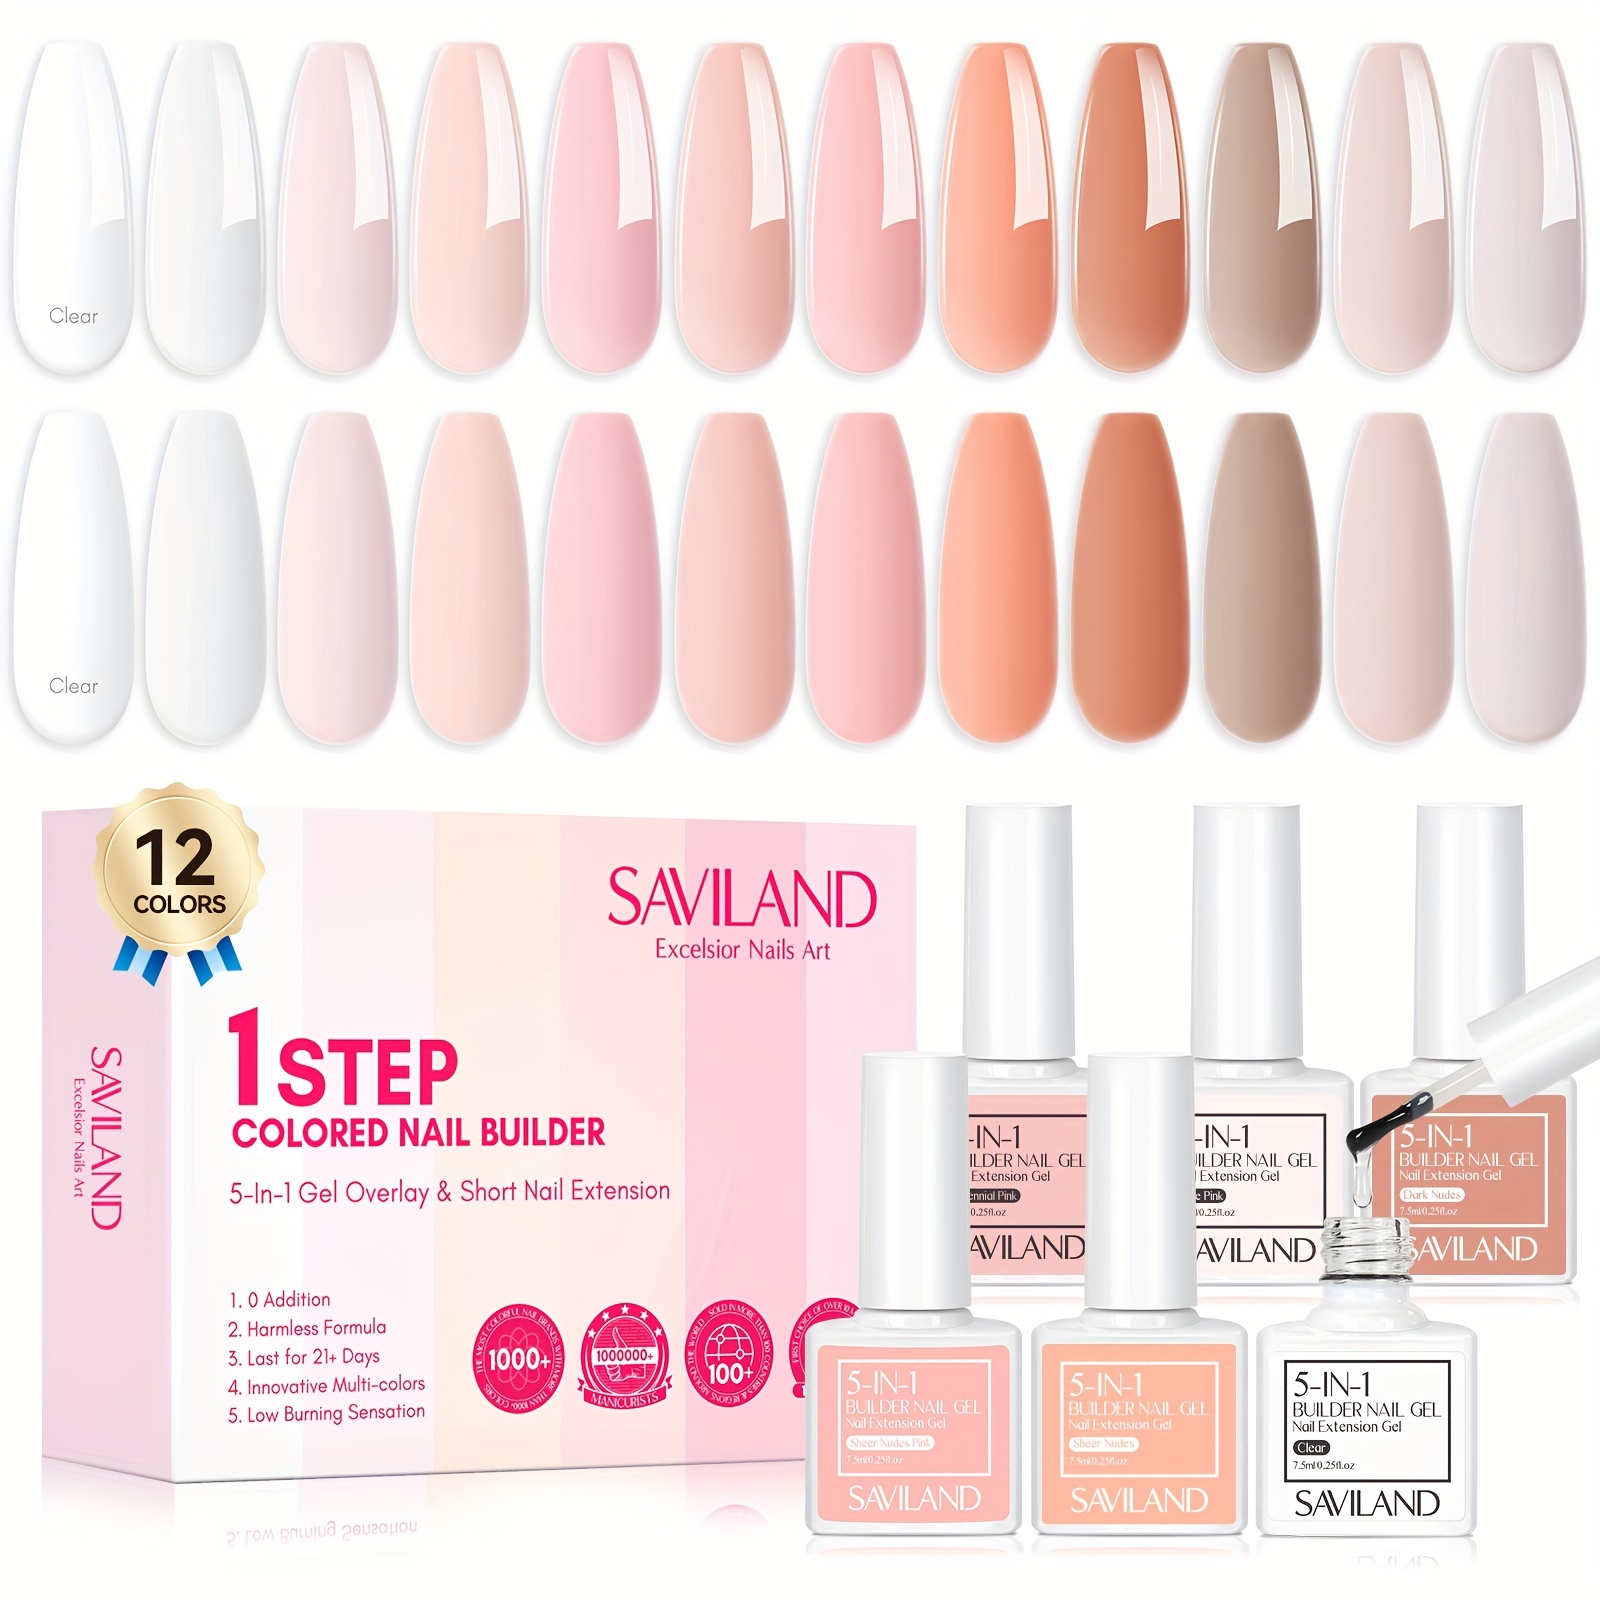 

12 Colors Multi-functions Builder Nail Gel Kit - Builder Nail Gel In A Bottle Nail Strengthener For Nails Rubber Gel Base For Nails Short Nail Extension Nail Art For Women